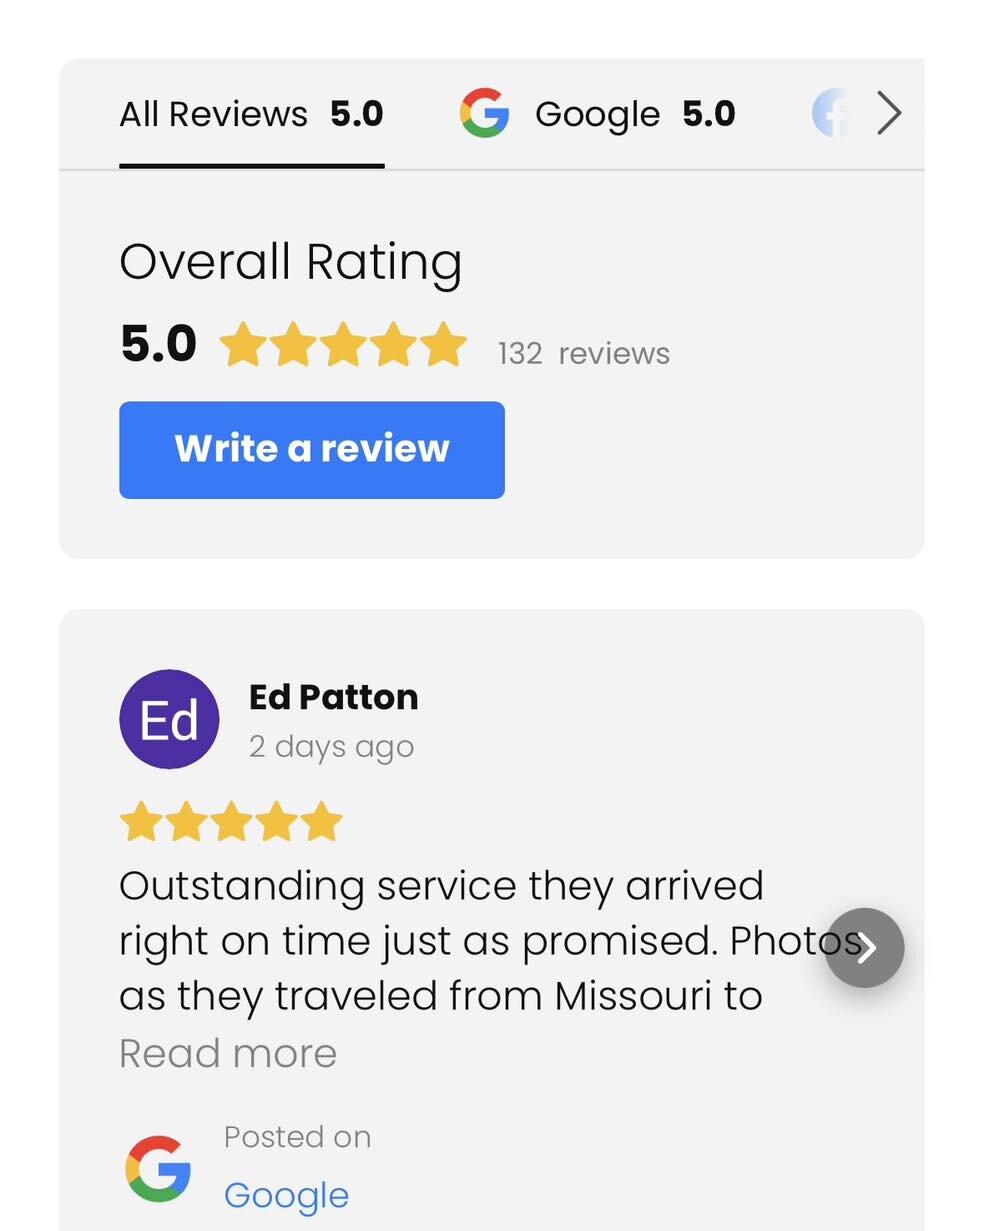 Over 130 5 star reviews, even after Google took 50 away from us for no reason. lol

Words cannot express how much we appreciate  the support from you guys! You put a tremendous amount of trust in us to give your furry member of the family a safe and 